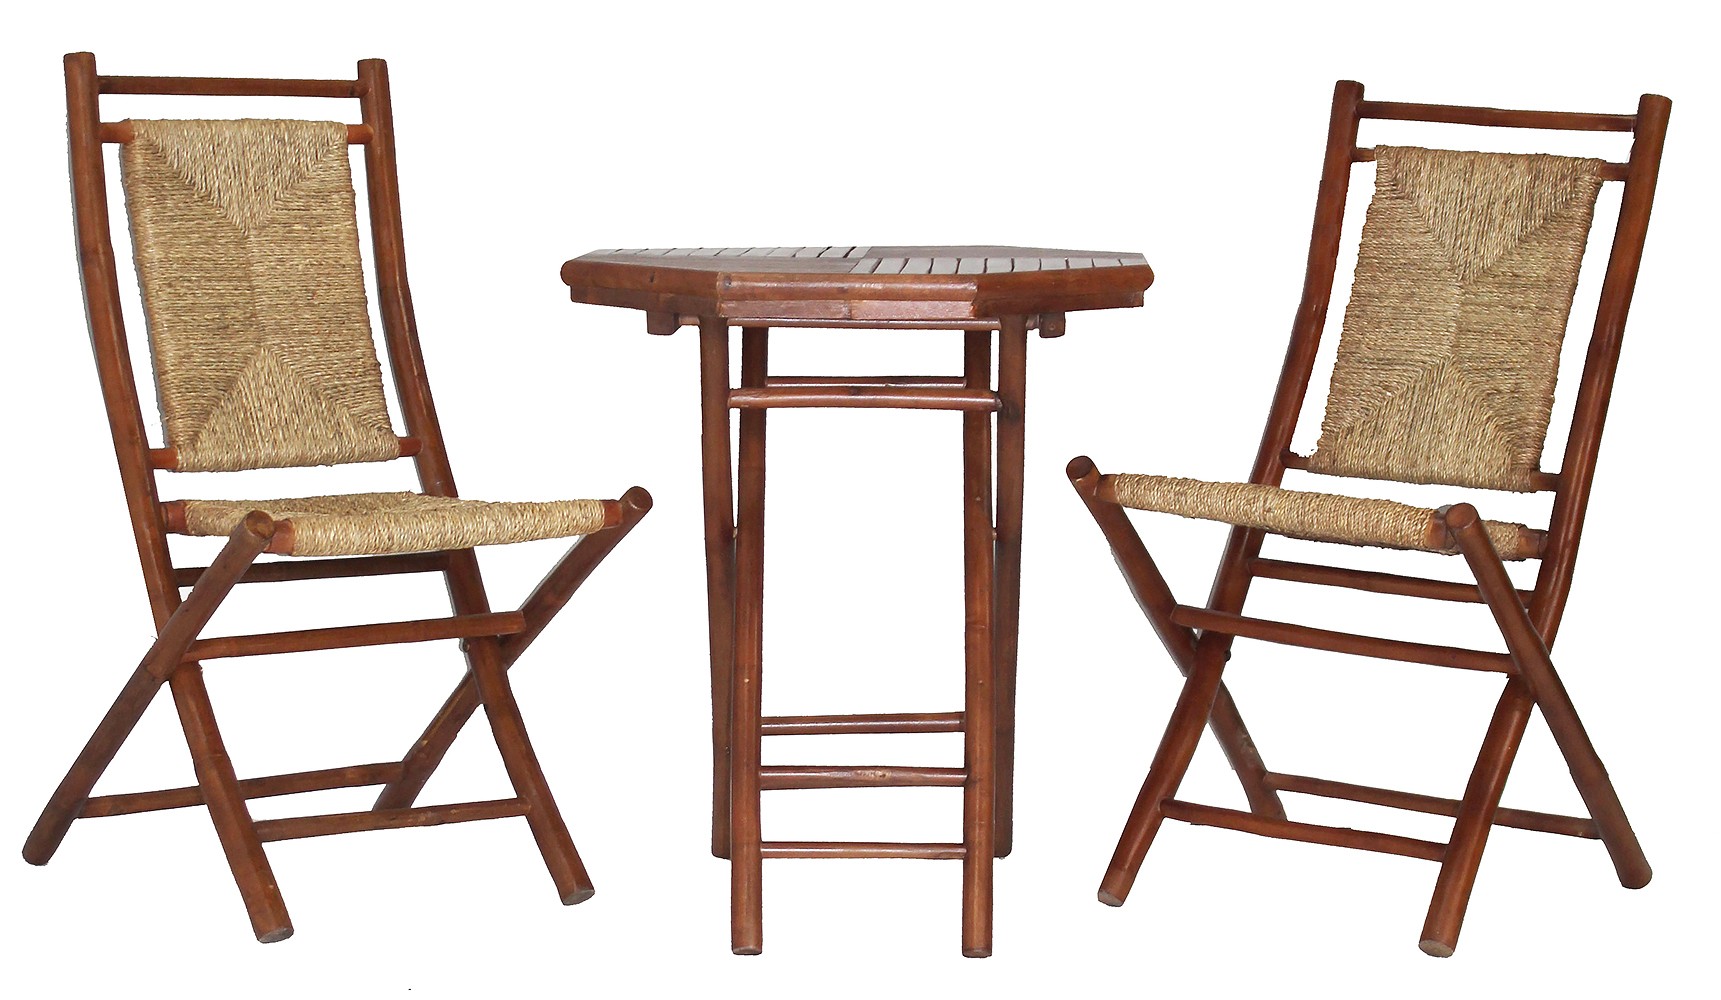 20" X 15" X 36" Brown Bamboo Natural Sea Grass Bamboo Weave set of Chairs and a Table